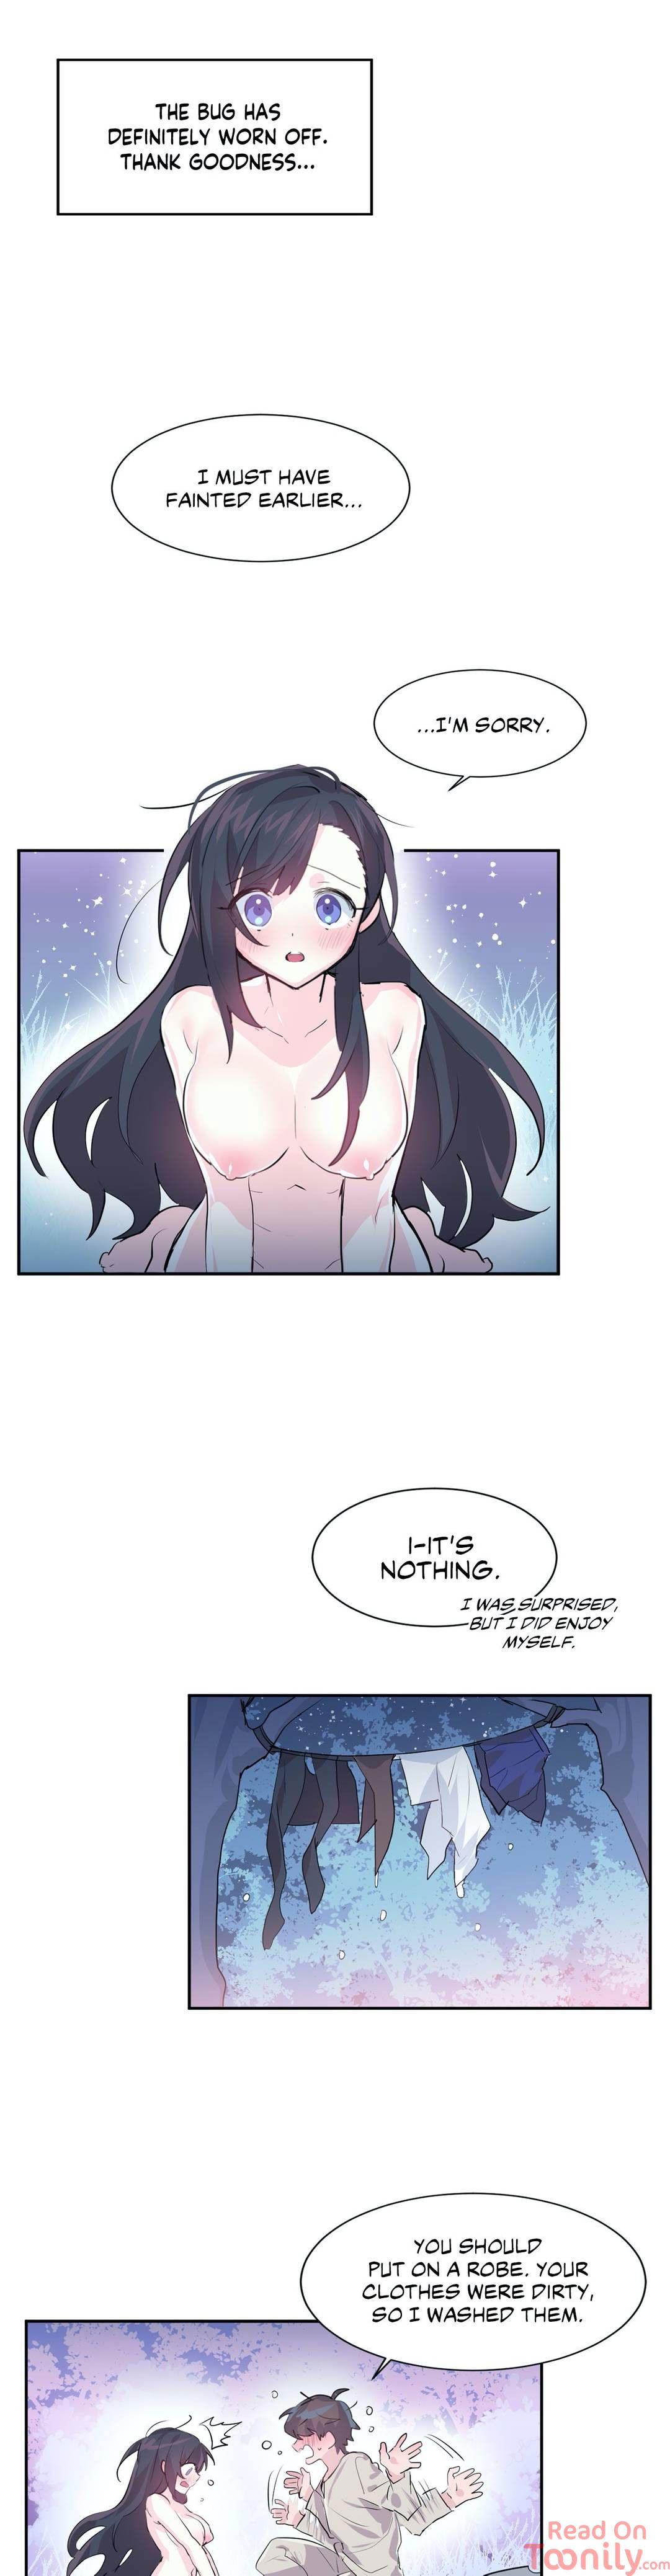 log-in-to-lust-a-land-chap-3-22